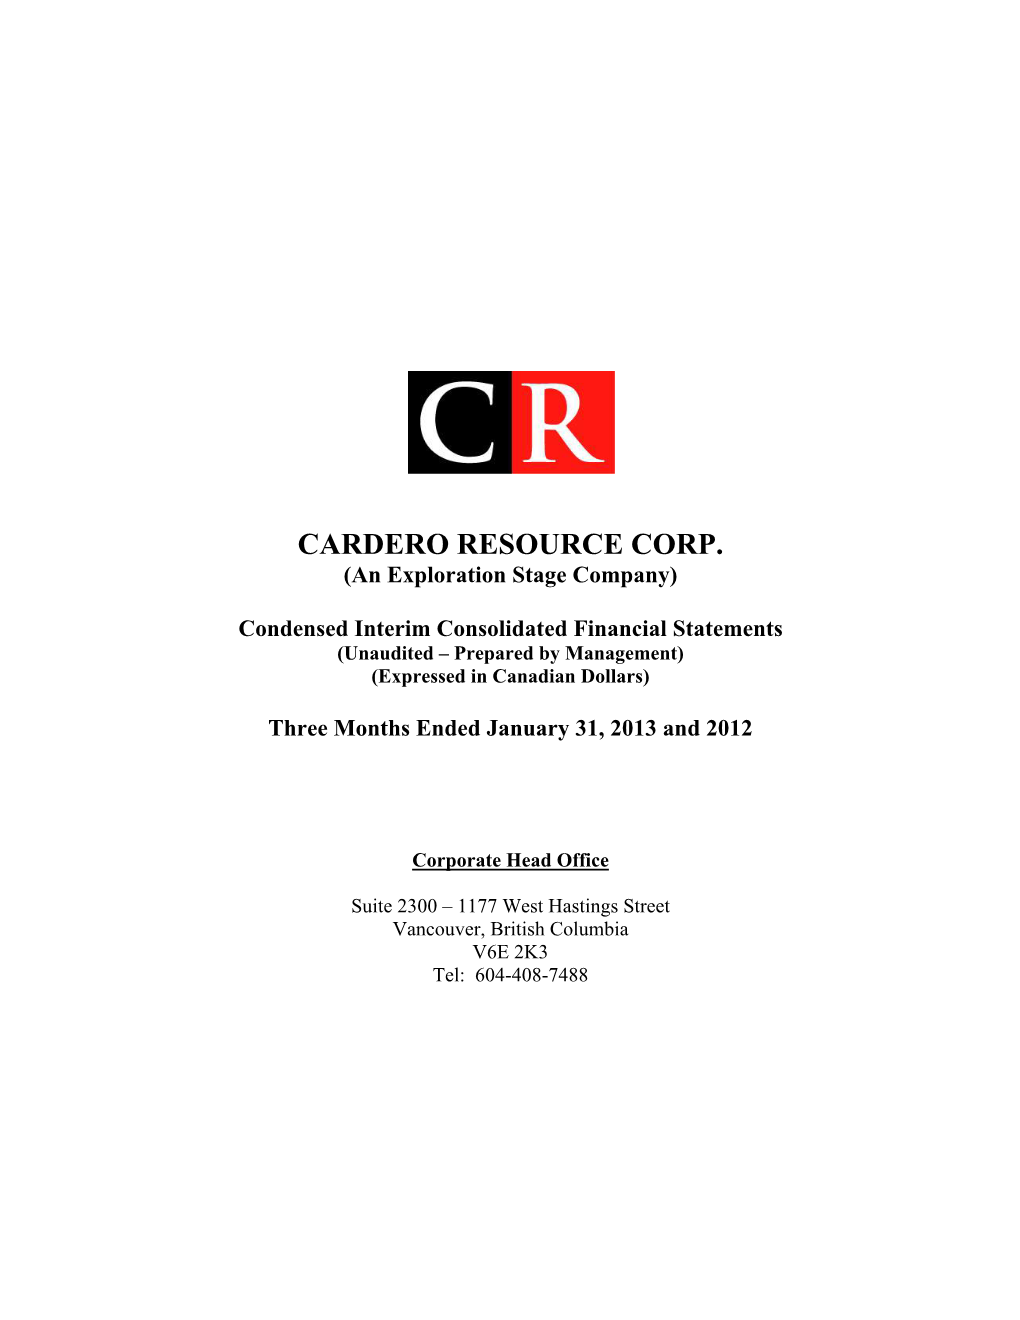 CARDERO RESOURCE CORP. (An Exploration Stage Company)